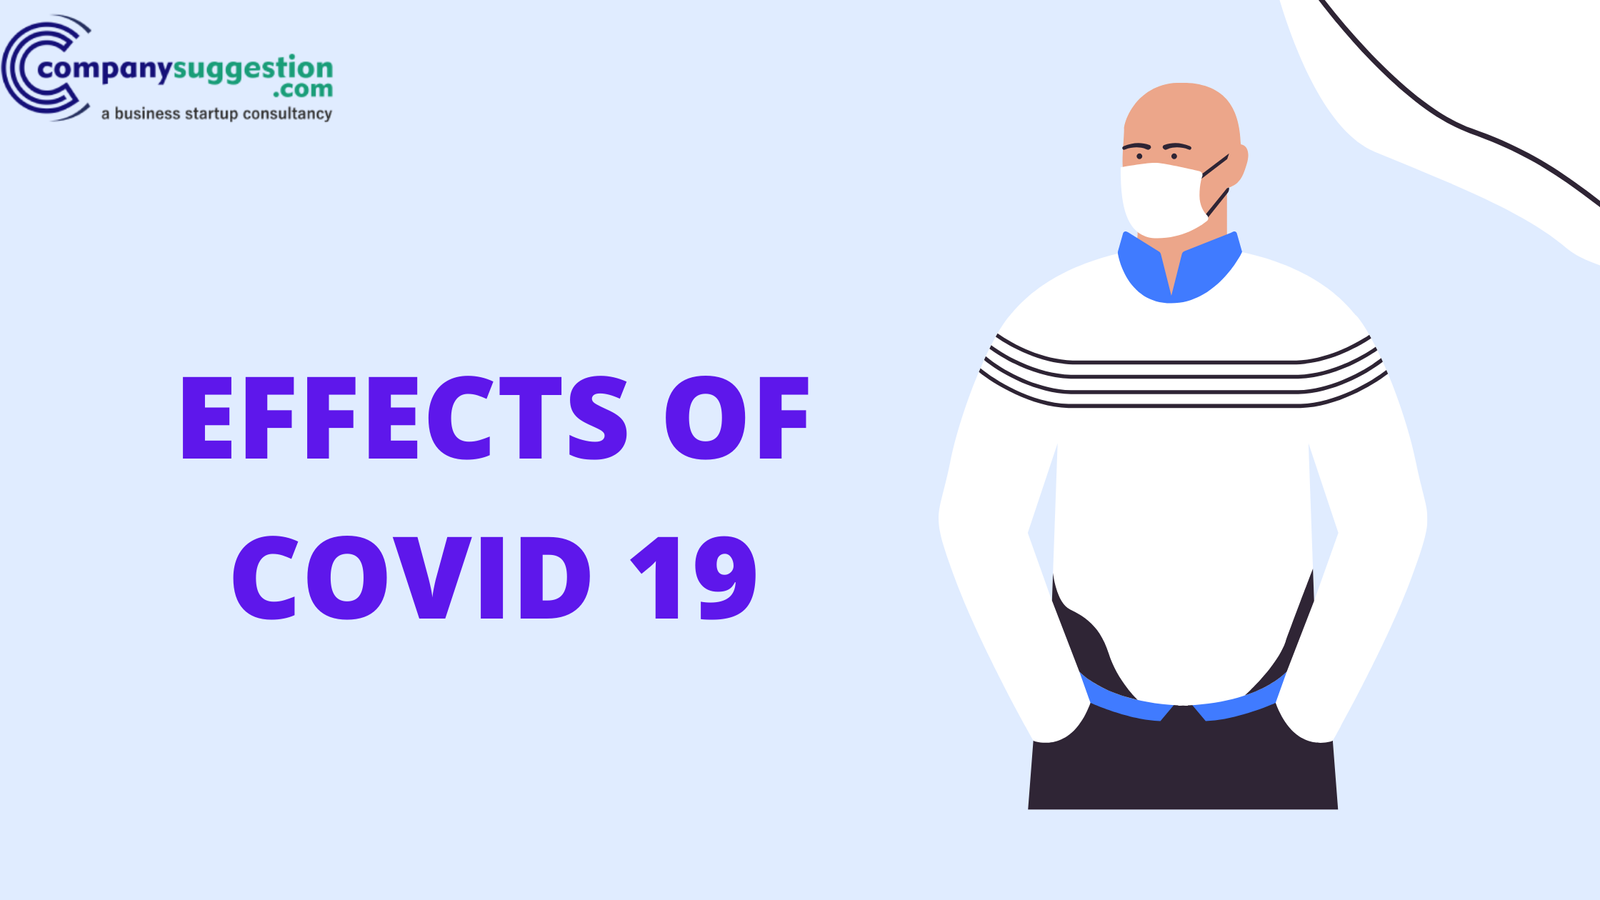 EFFECTS OF COVID 19